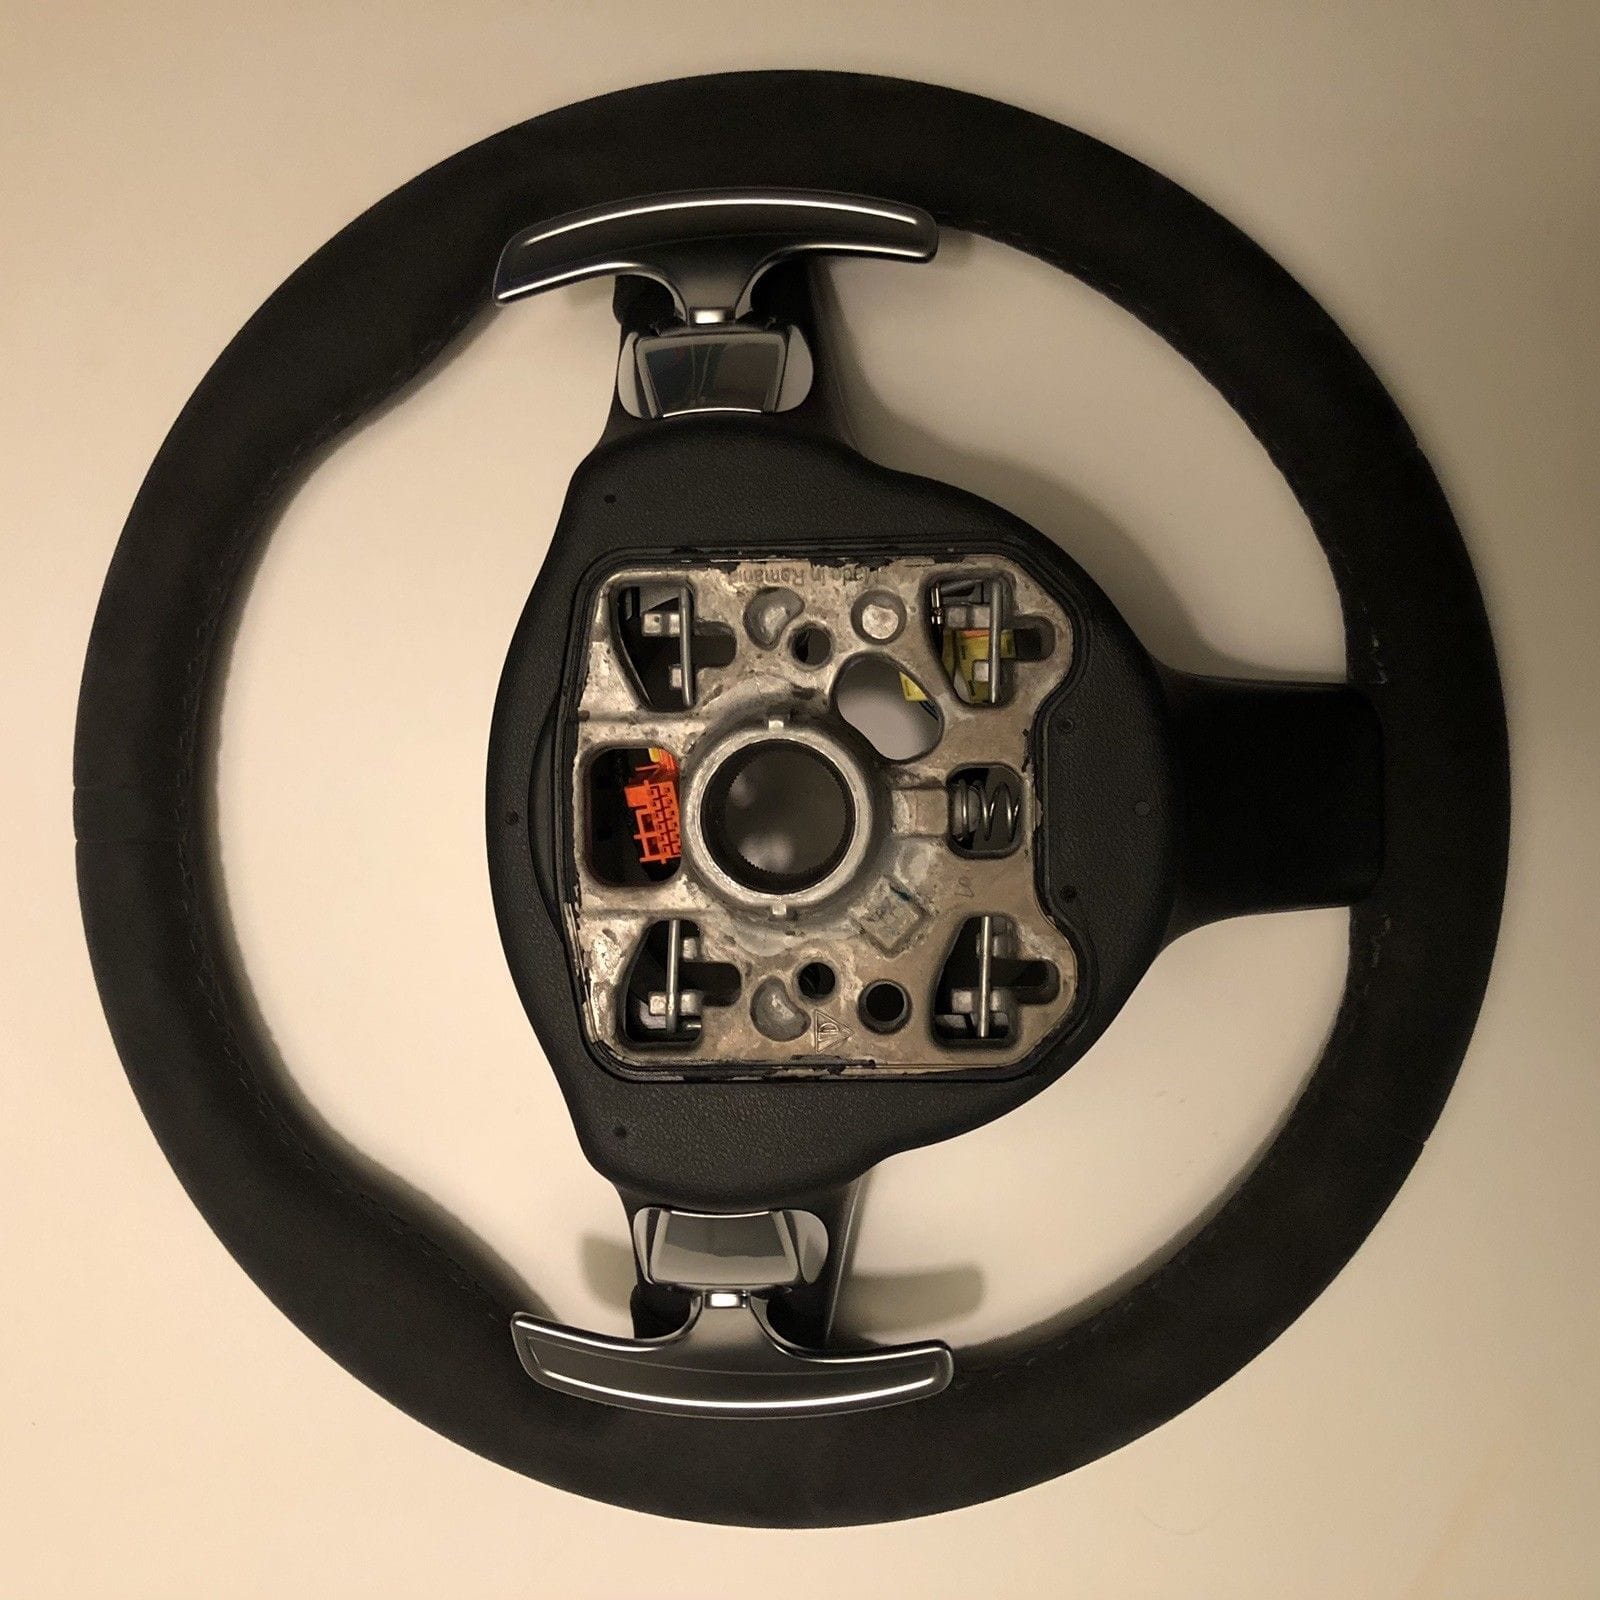 Interior/Upholstery - *Weekend Blowout* 911 PDK Paddleshift Sport Design Steering Wheel in Alcantara - Used - 2013 to 2016 Porsche 911 - New York City, NY 11217, United States